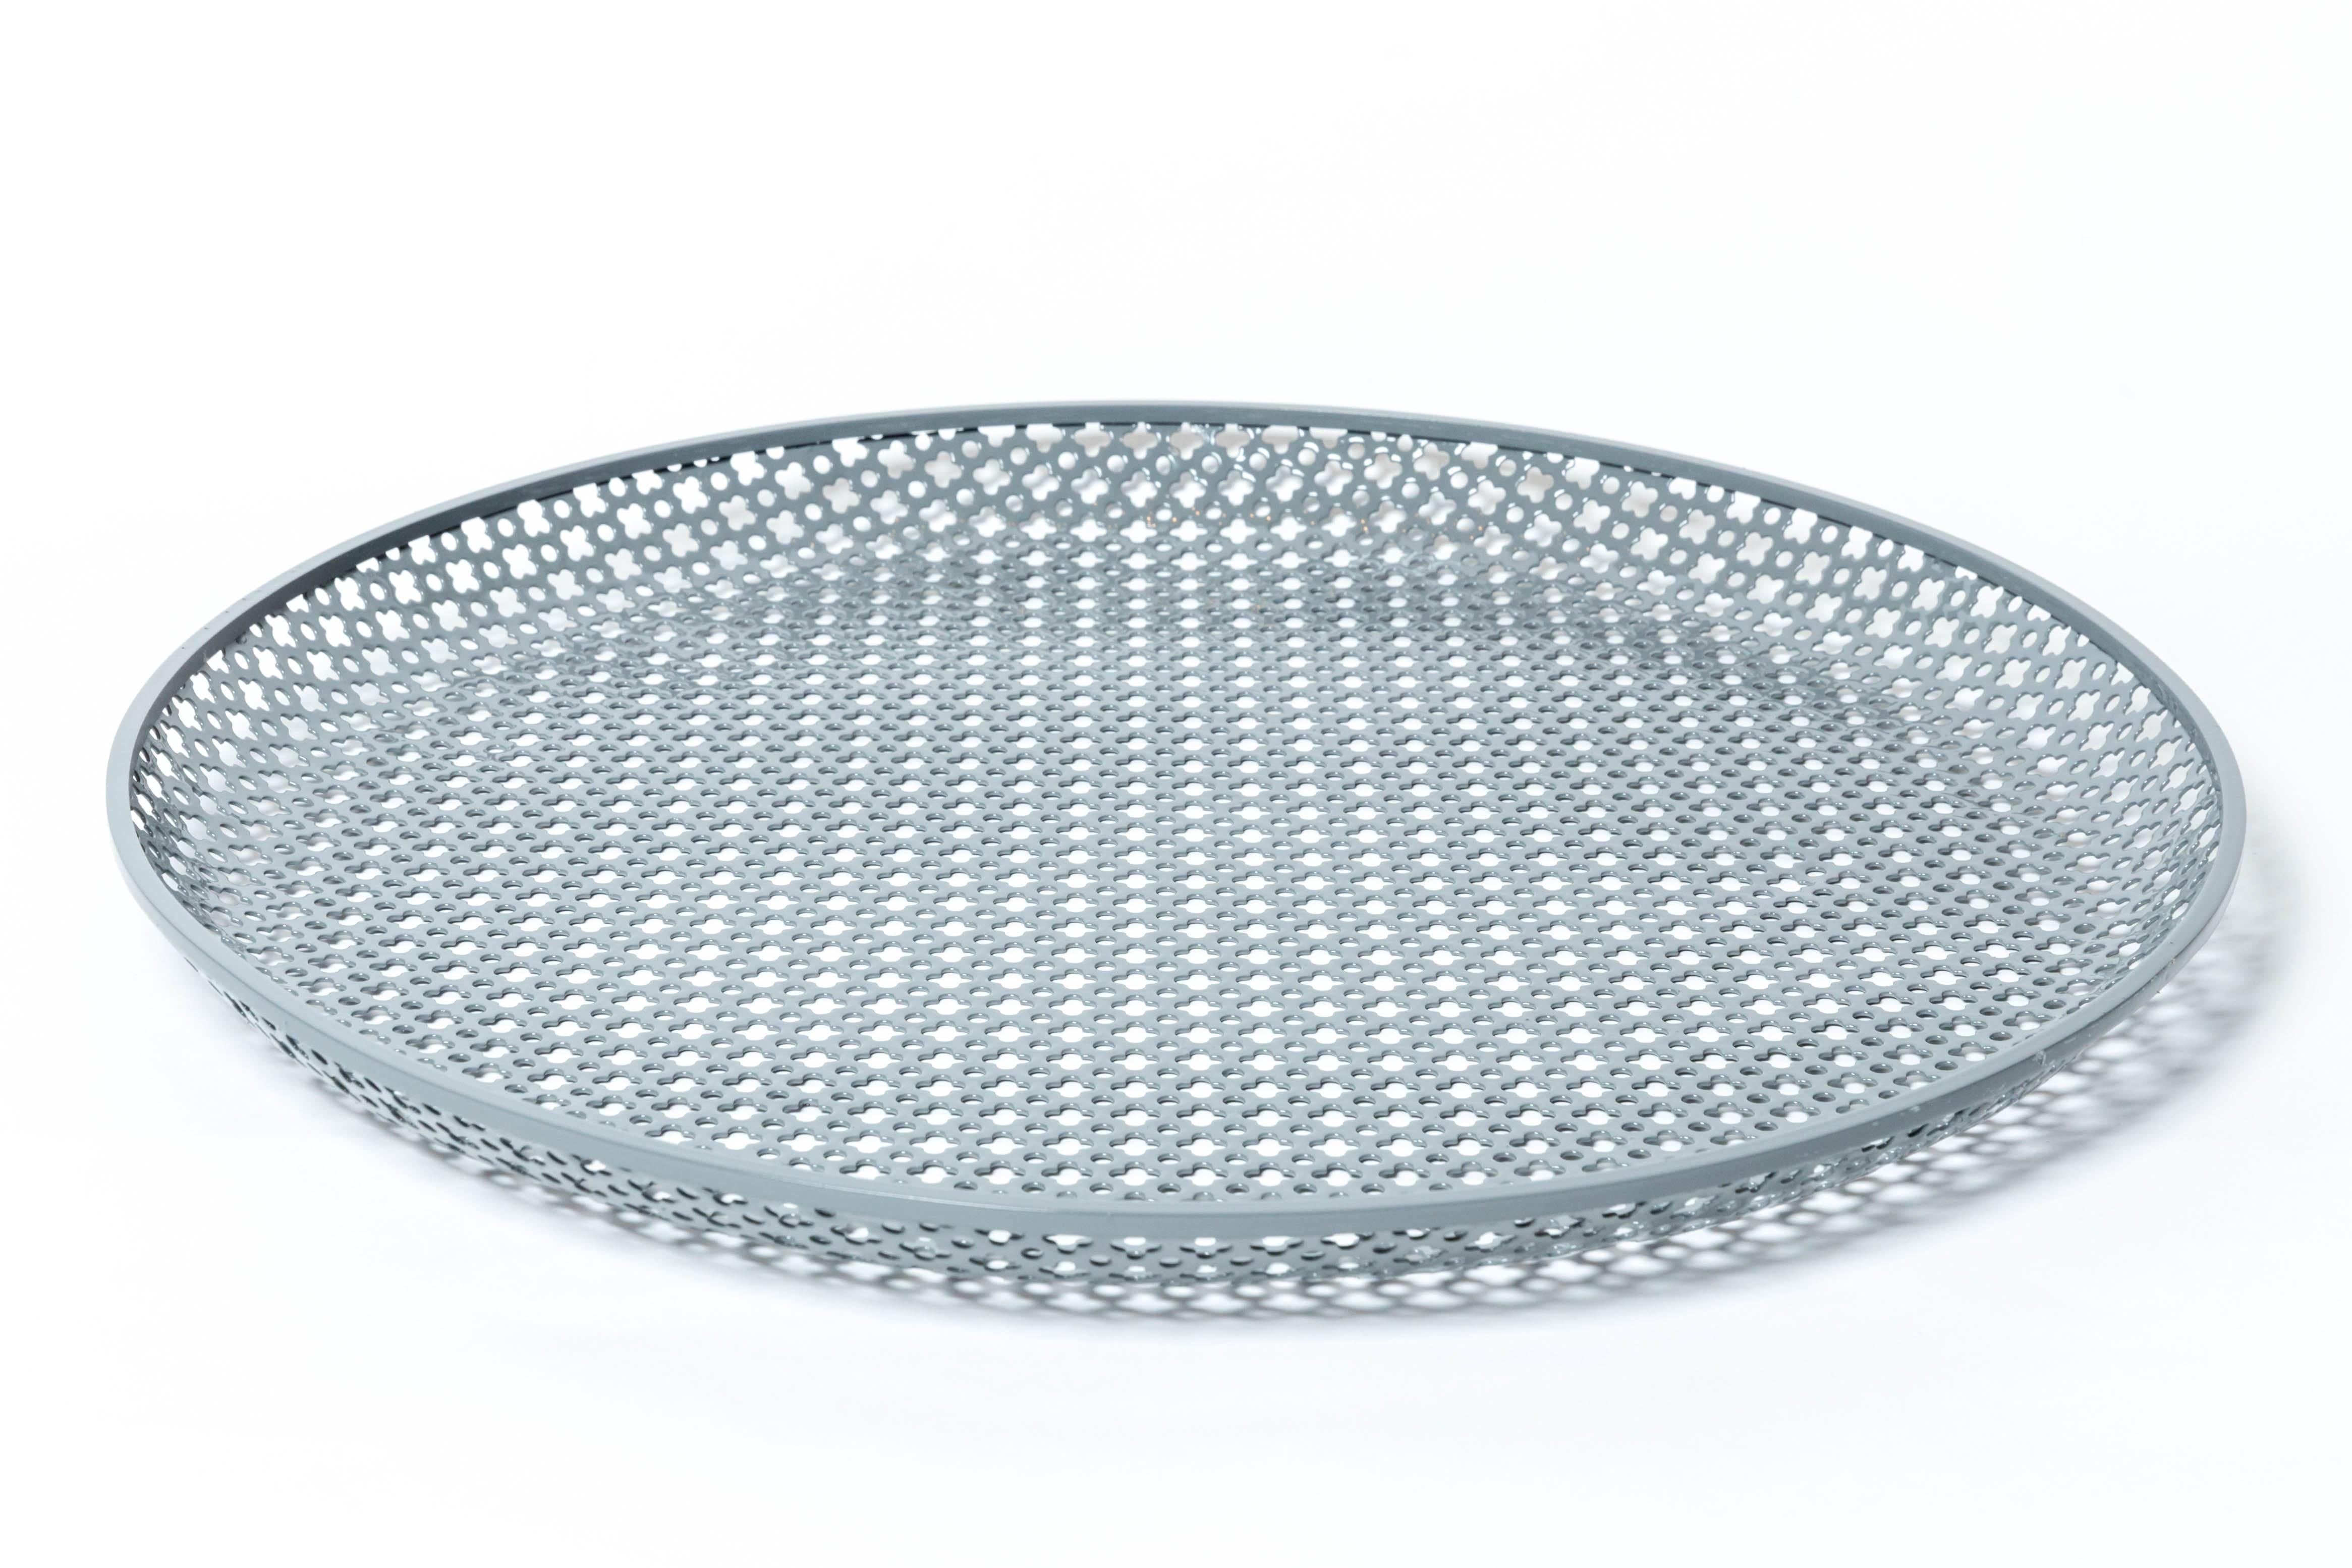 Mid-20th Century Perforated Gray Enameled Platter by Mathieu Matégot, France, 1950